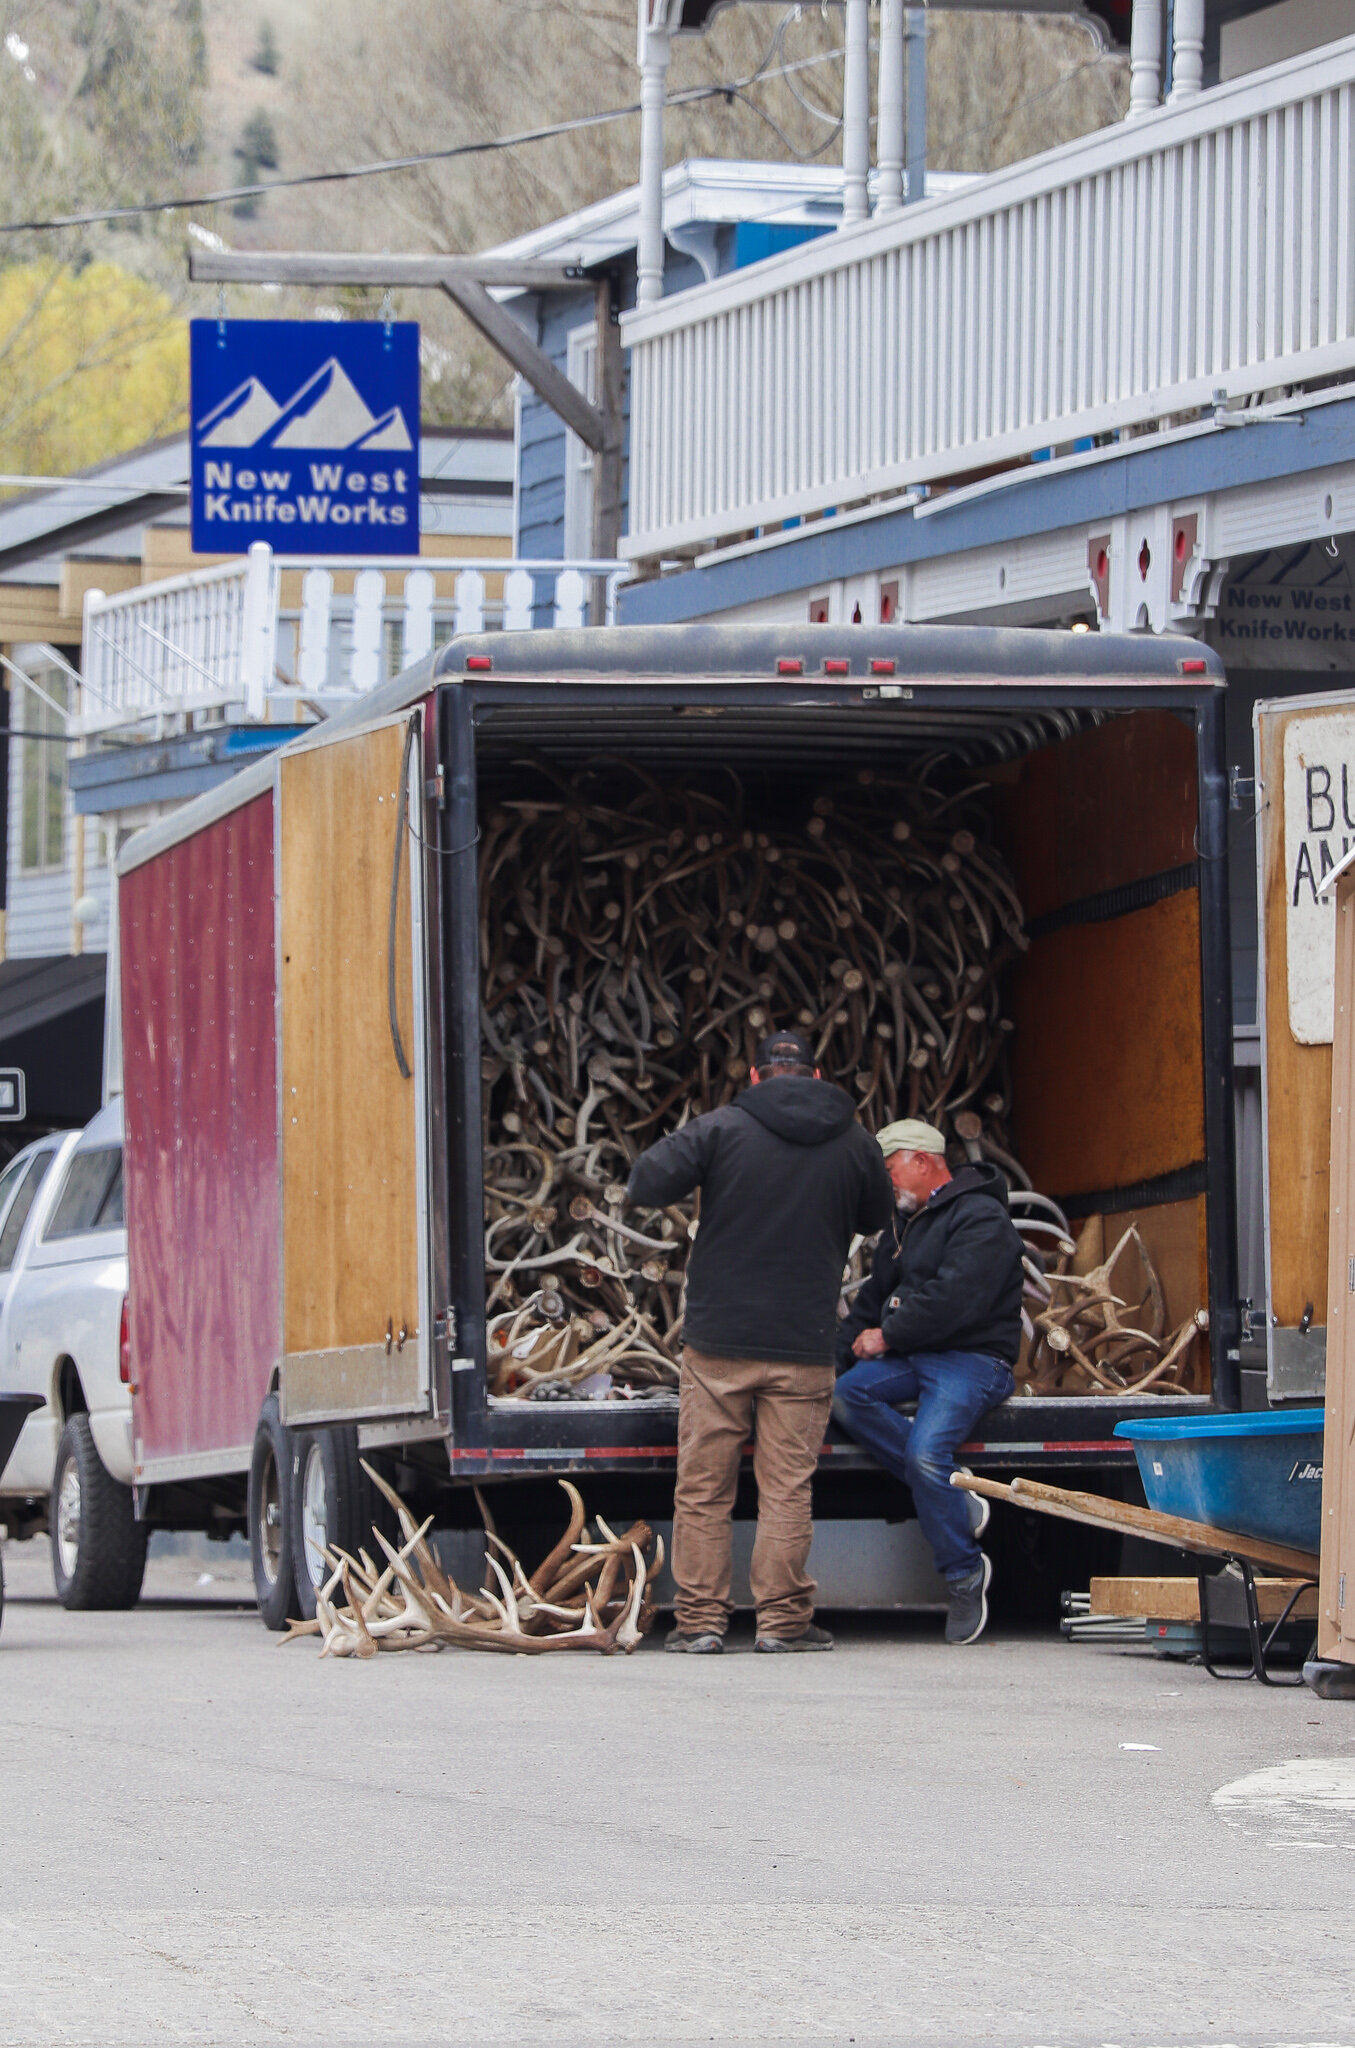  In the spring, locals collect antlers to sell.  They block off one side of the square and lay out their goods. 